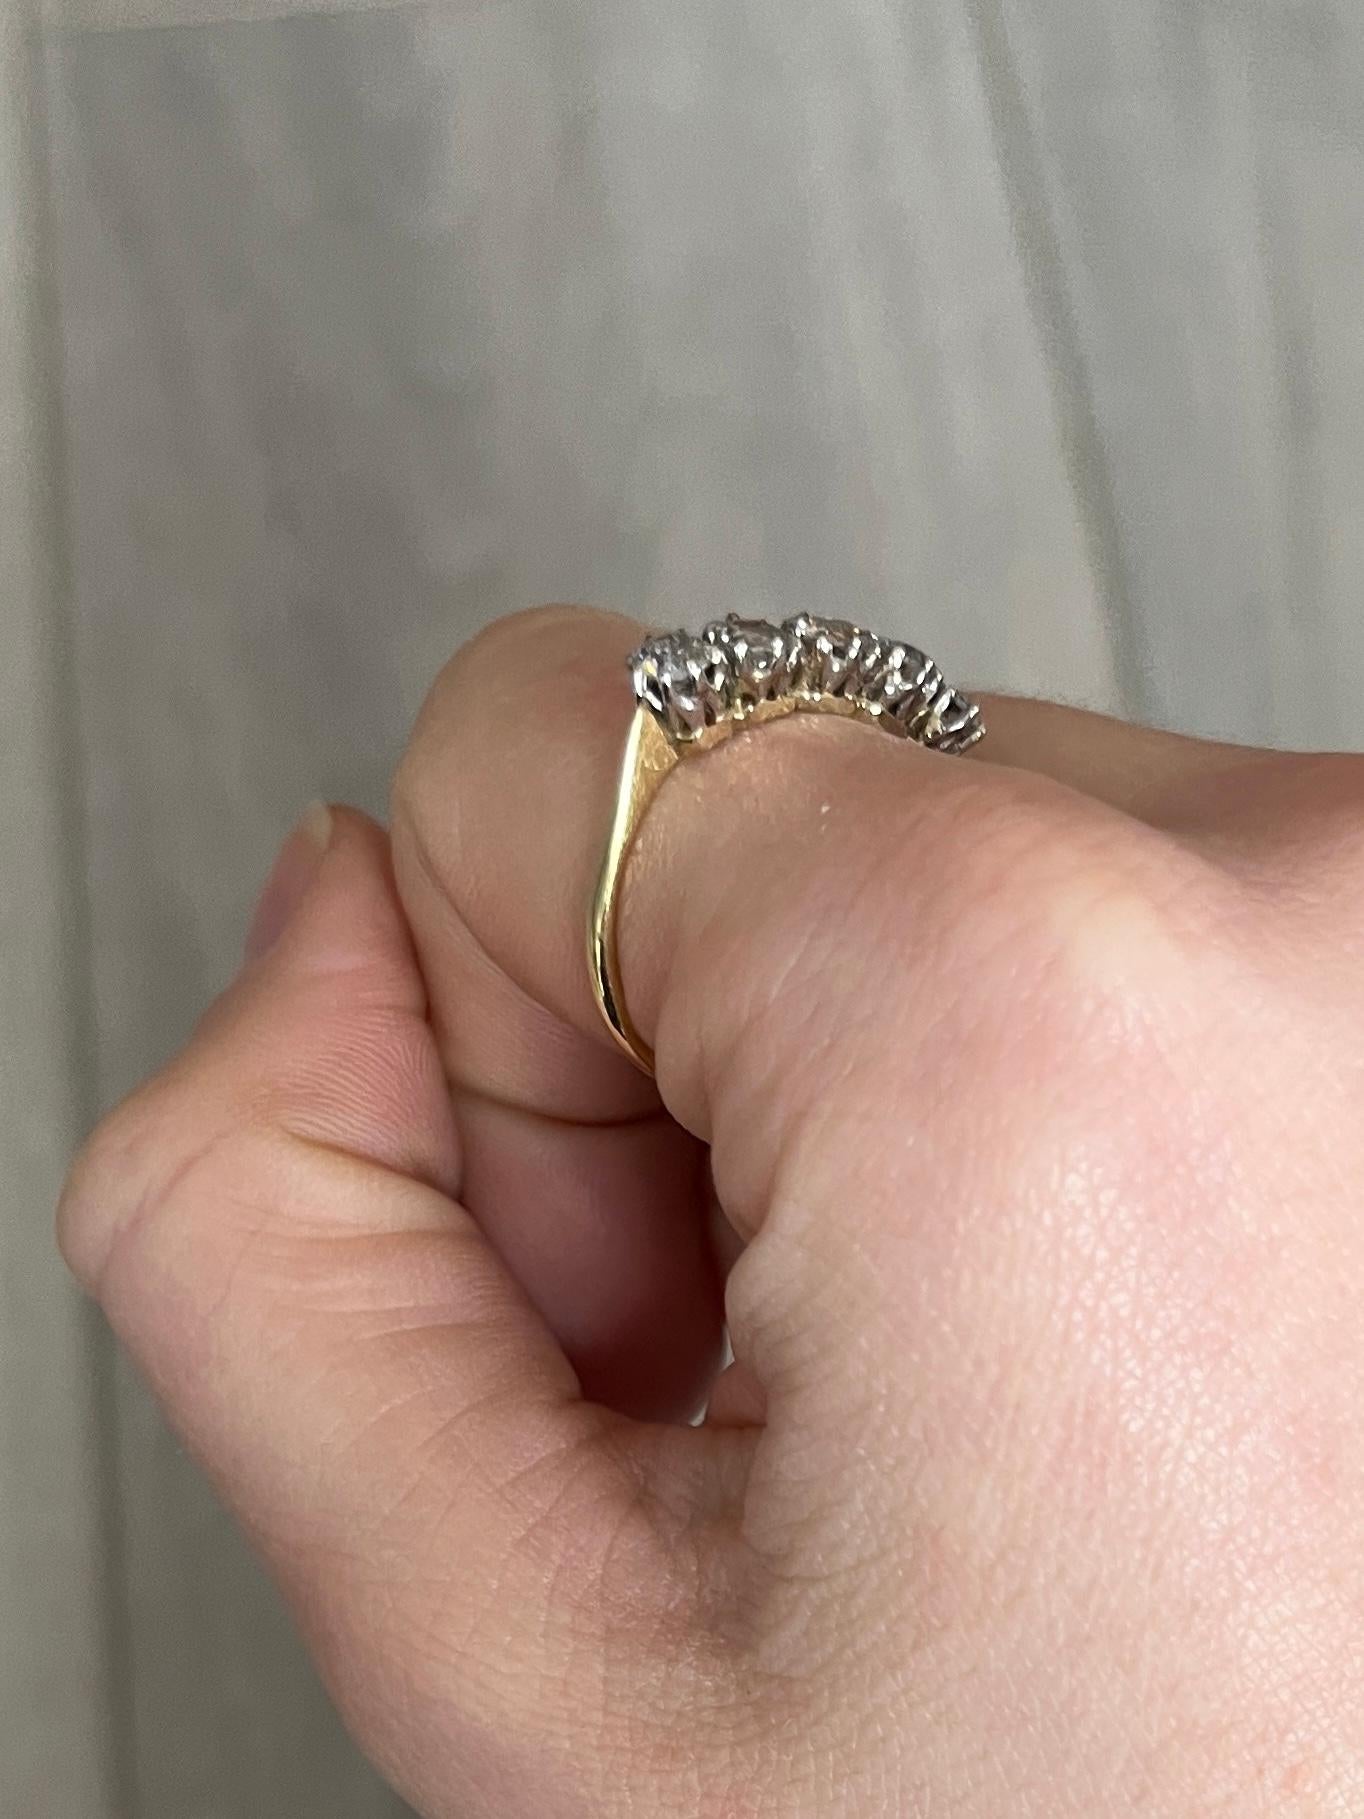 Five glistening diamonds sit fabulously on top of a simple open work claw setting modelled in platinum. The diamonds total 1.3ct. This ring is modelled in 18carat gold. 

Ring Size: O 1/2 or 7 1/2 
Height off finger: 4mm

Weight: 2.5g